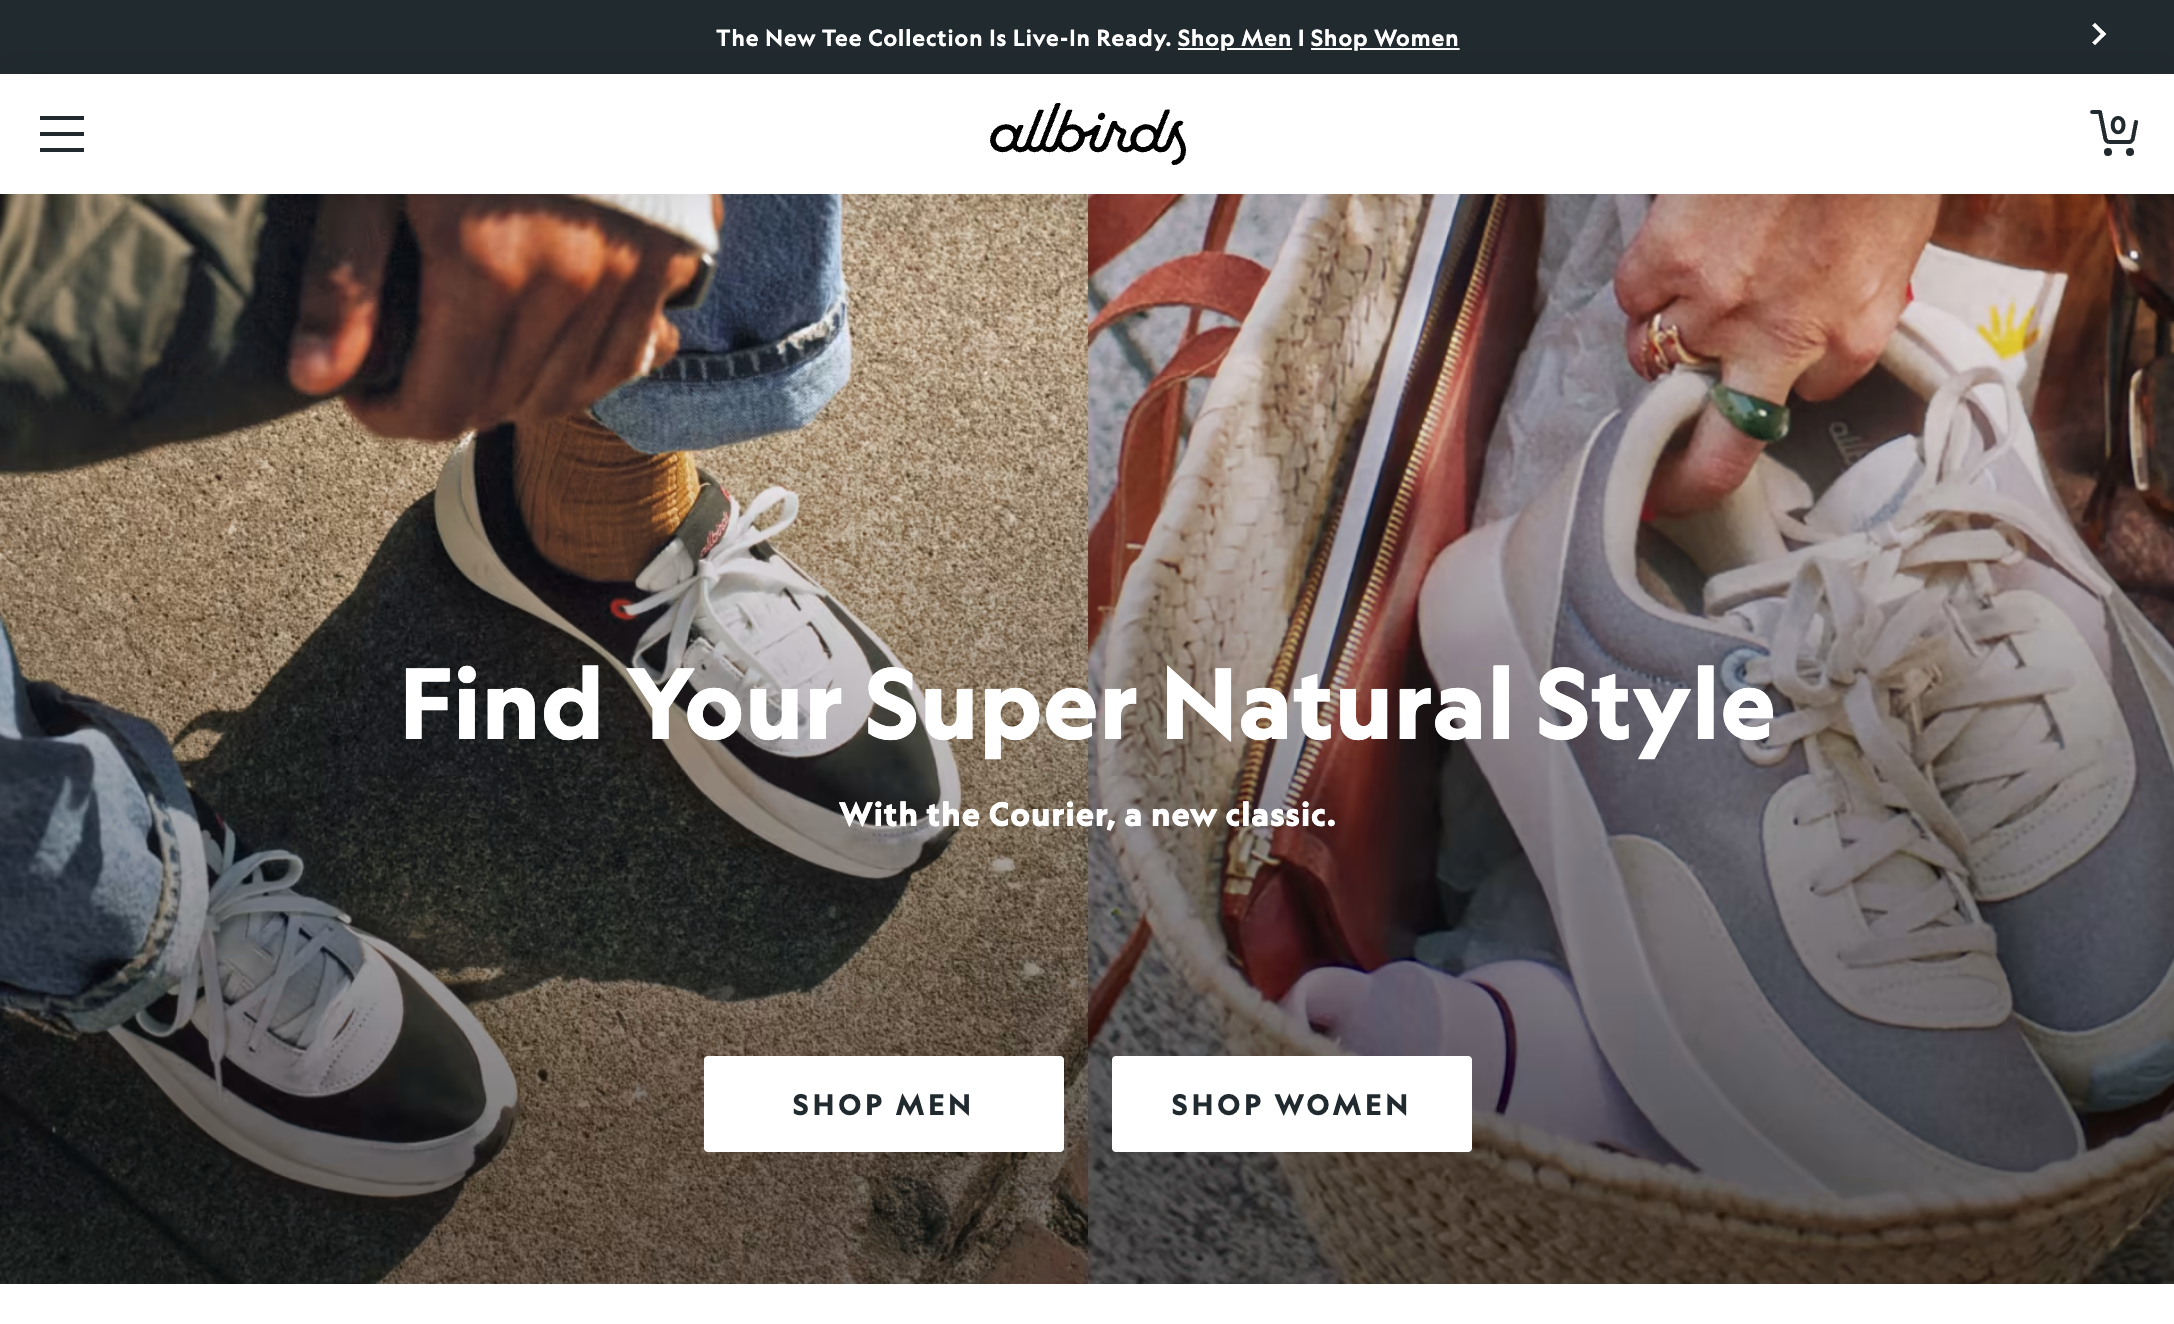 An ecommerce homepage from the online store of Allbirds